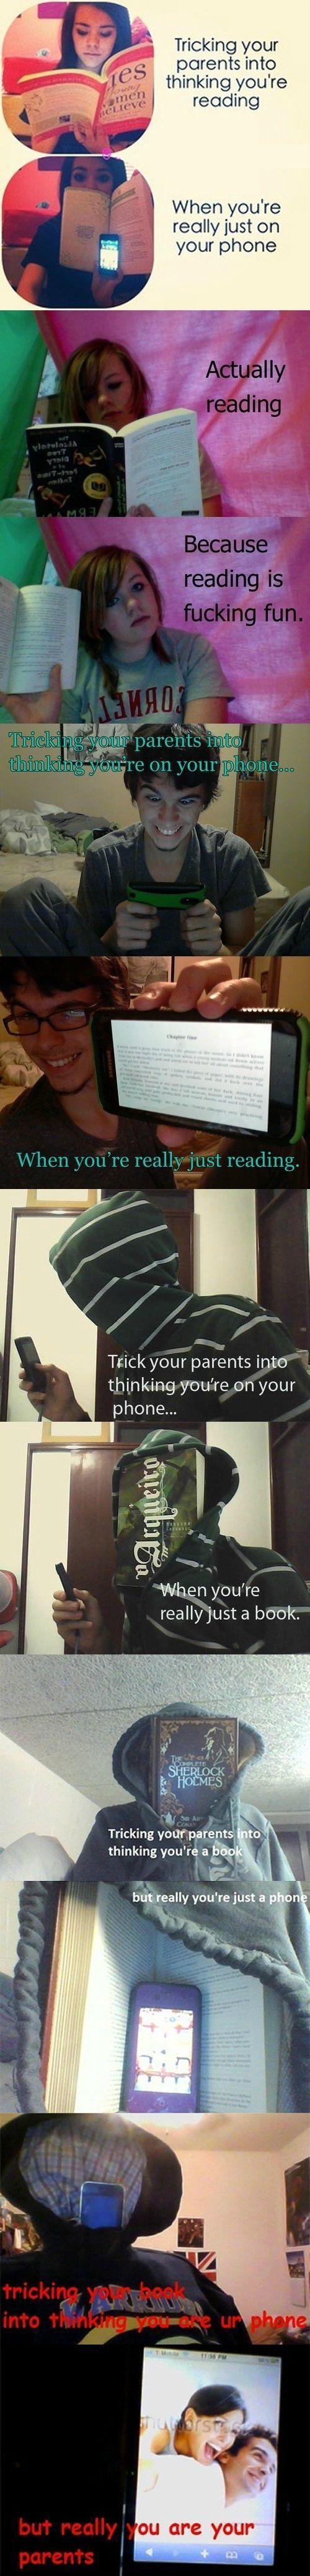 Tricking your parents - Win Picture | Webfail - Fail Pictures and Fail ...